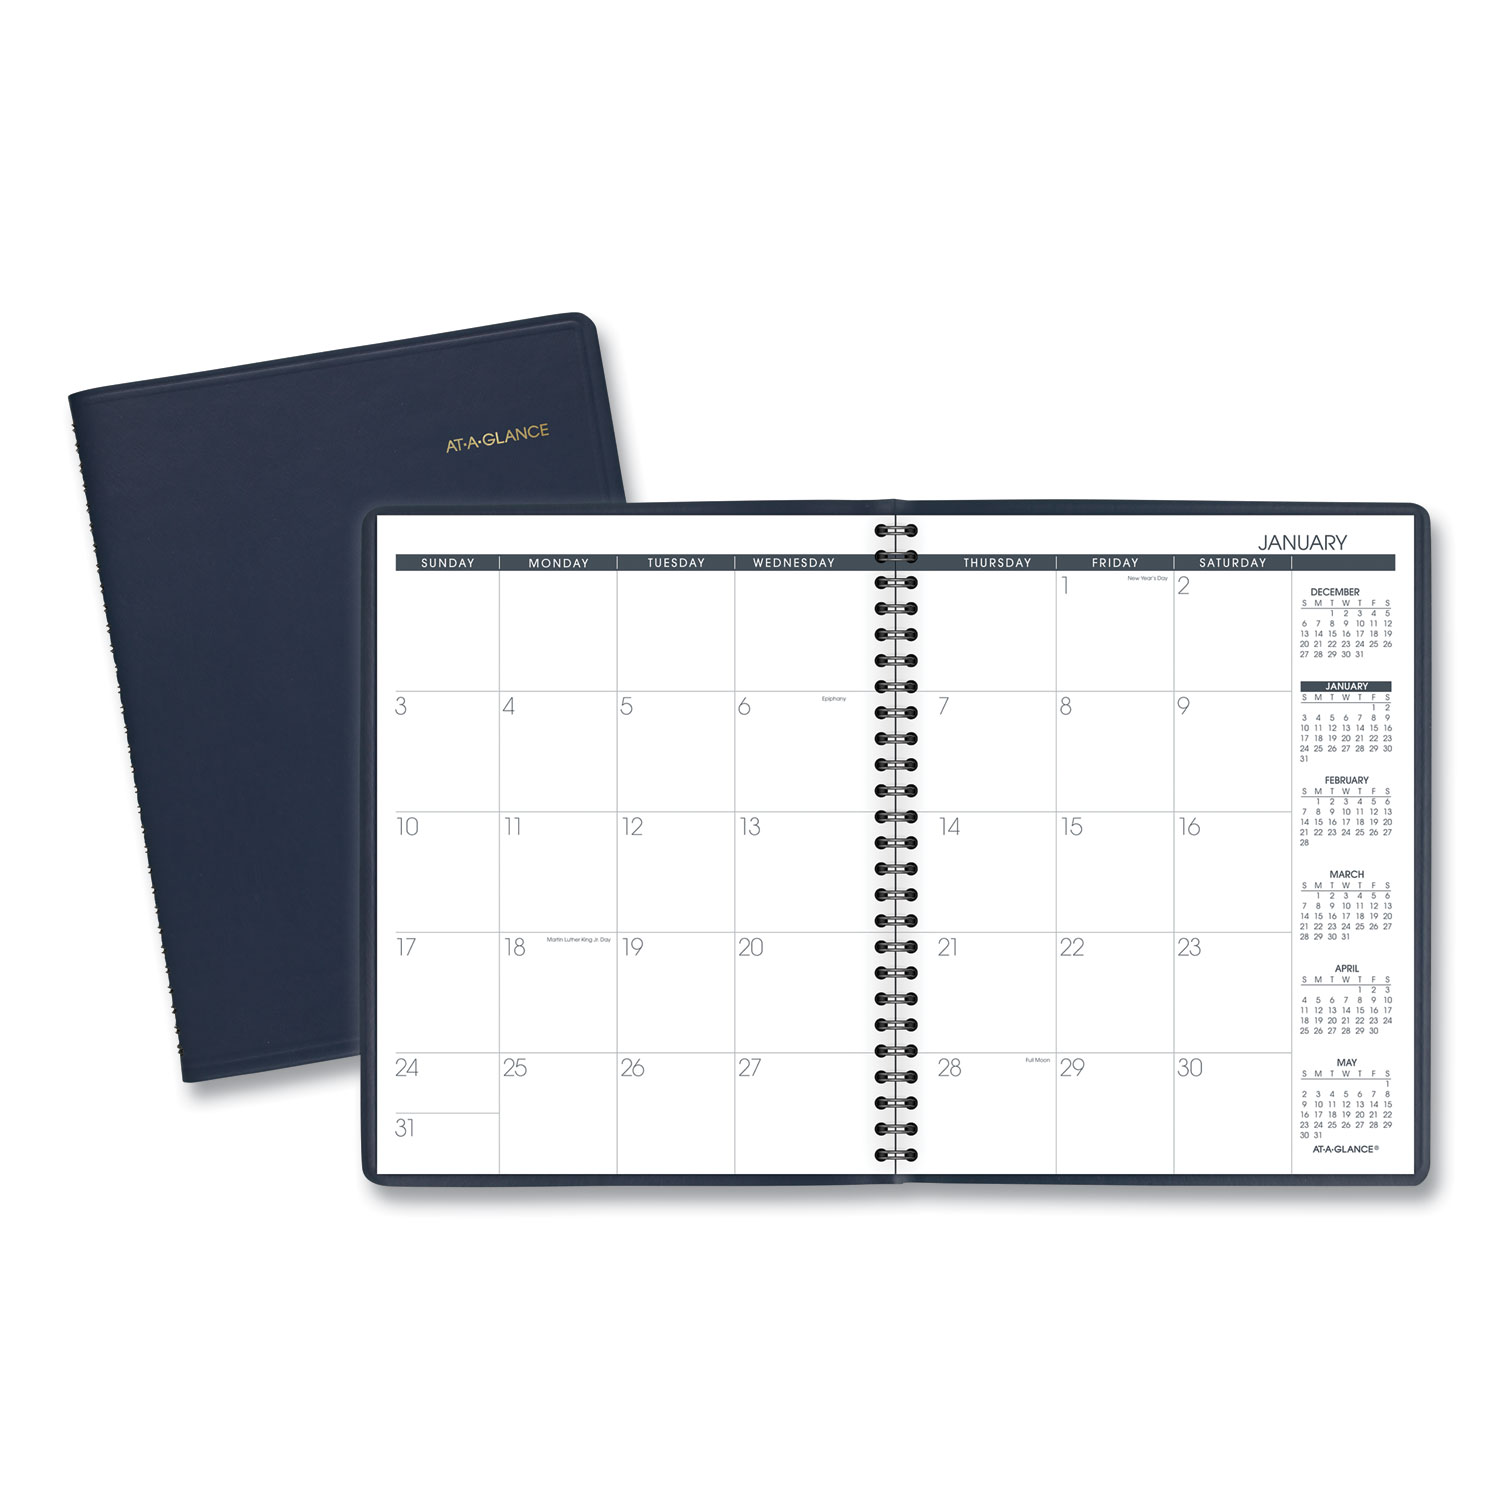  AT-A-GLANCE 7012020 Monthly Planner, 8 3/4 x 6 7/8, Navy, 2020 (AAG7012020) 